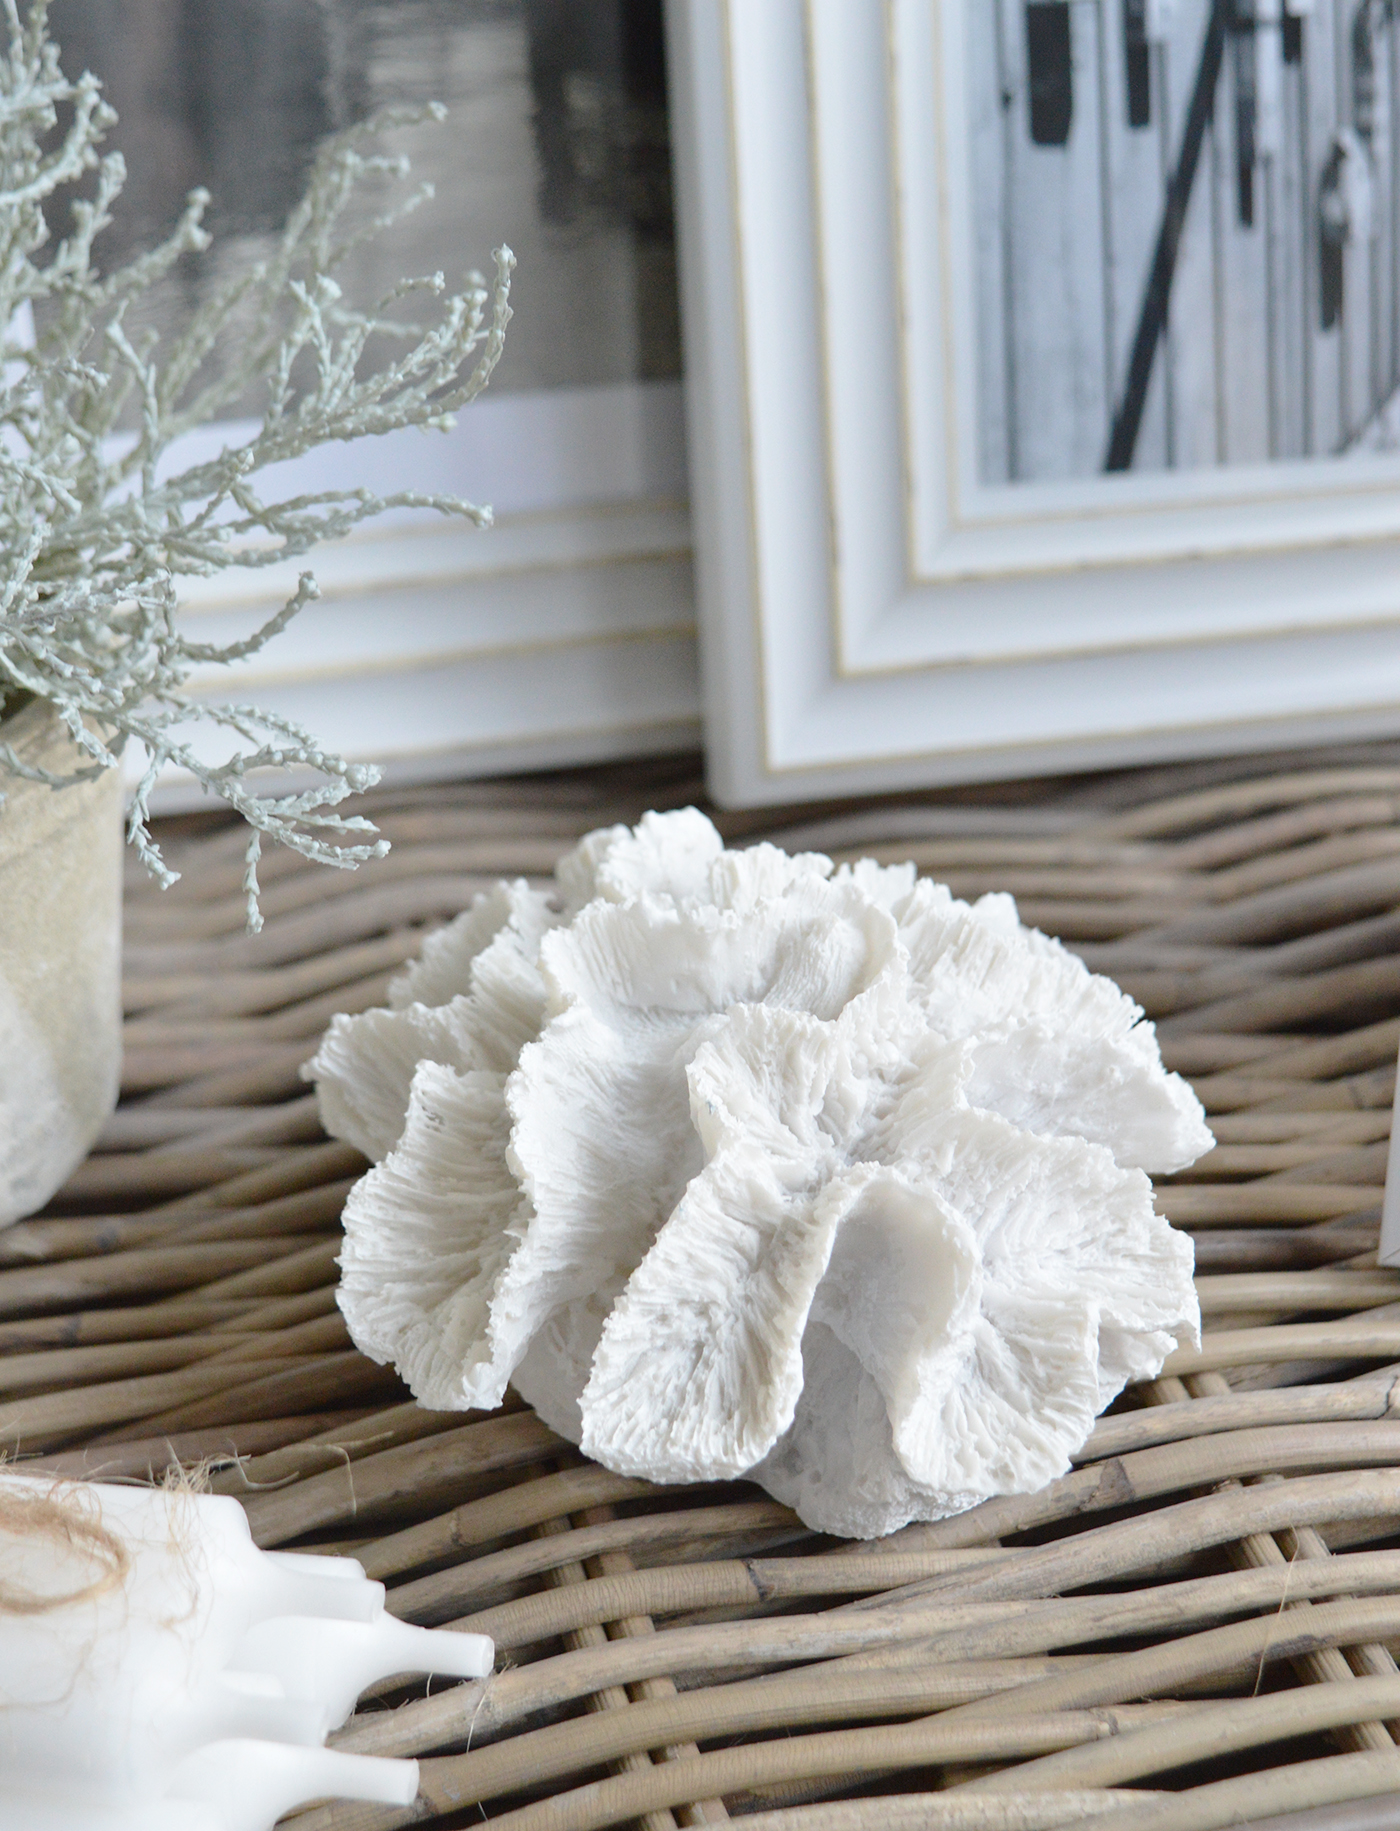 Small faux coral for styling coffee and console tables in a coastal or Hamptons style interior